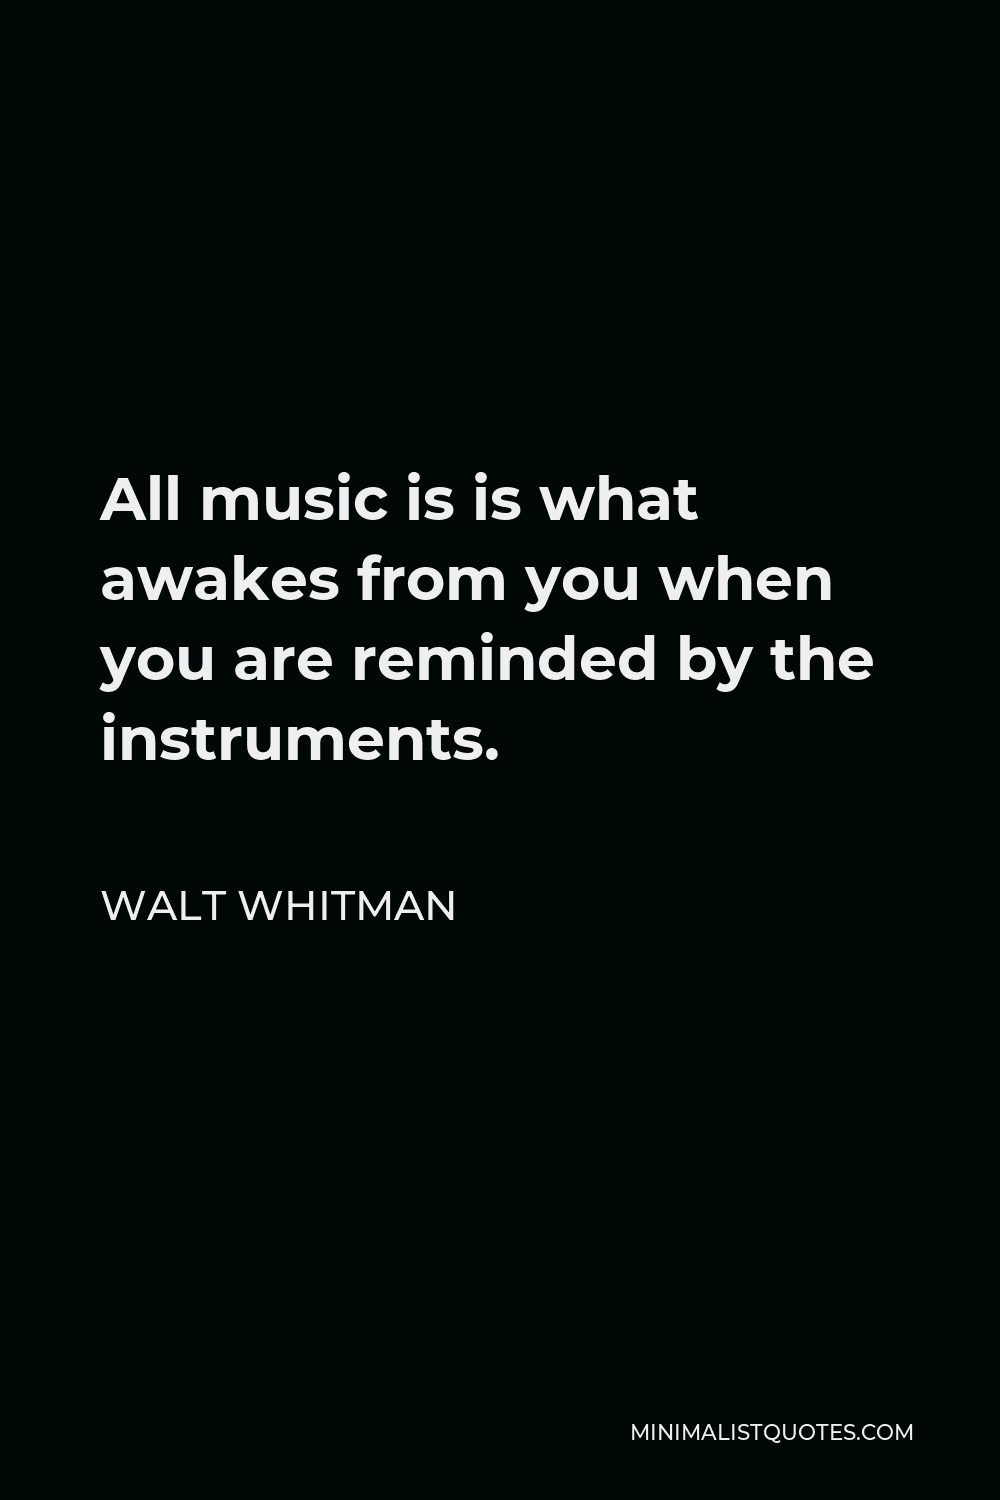 Walt Whitman Quote - All music is is what awakes from you when you are reminded by the instruments.